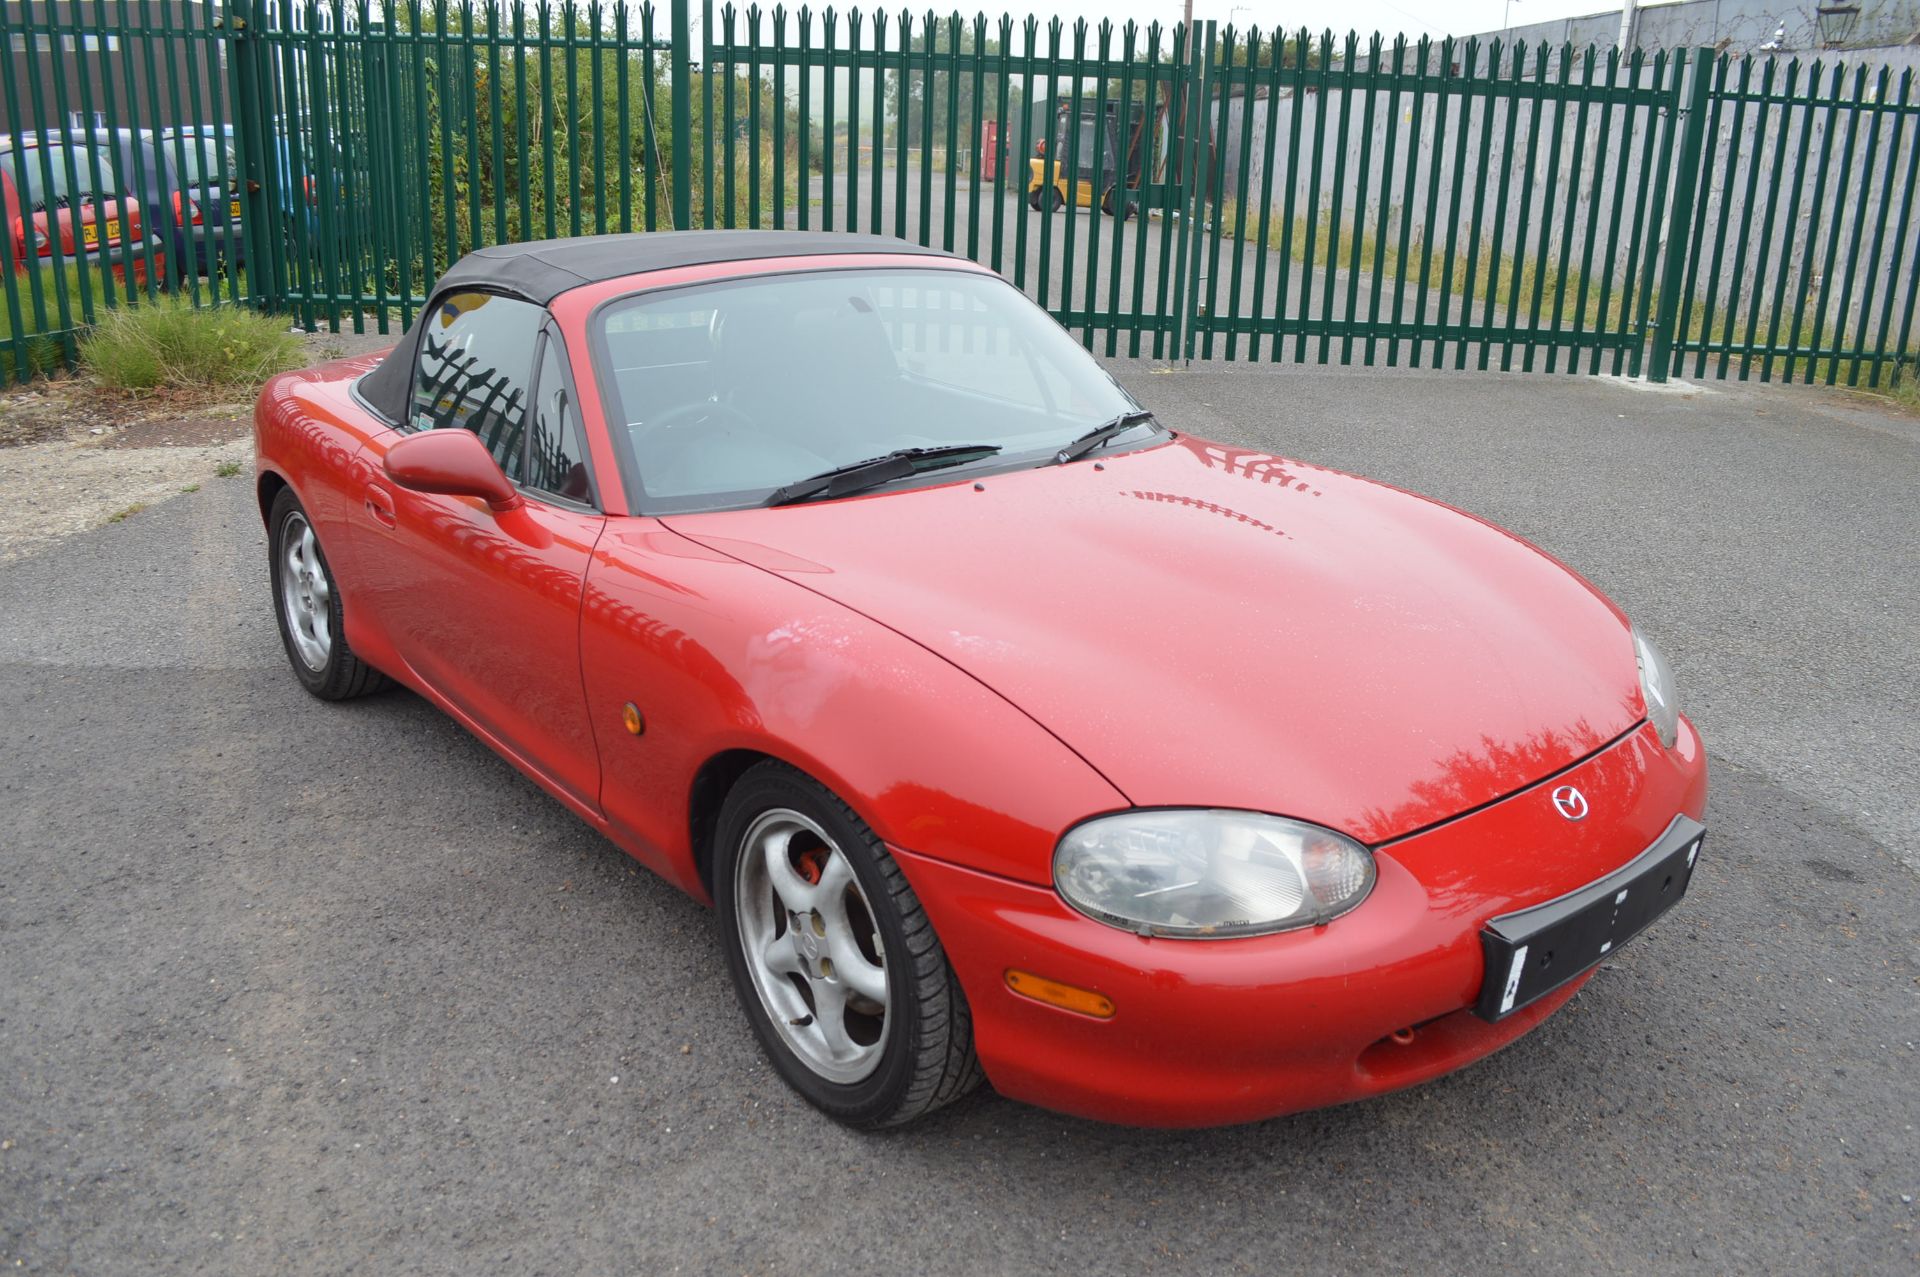 2001/Y REG MAZDA MX-5 1.81 CONVERTIBLE, UPRATED SUSPENSION, BRAKES, INDUCTION ETC